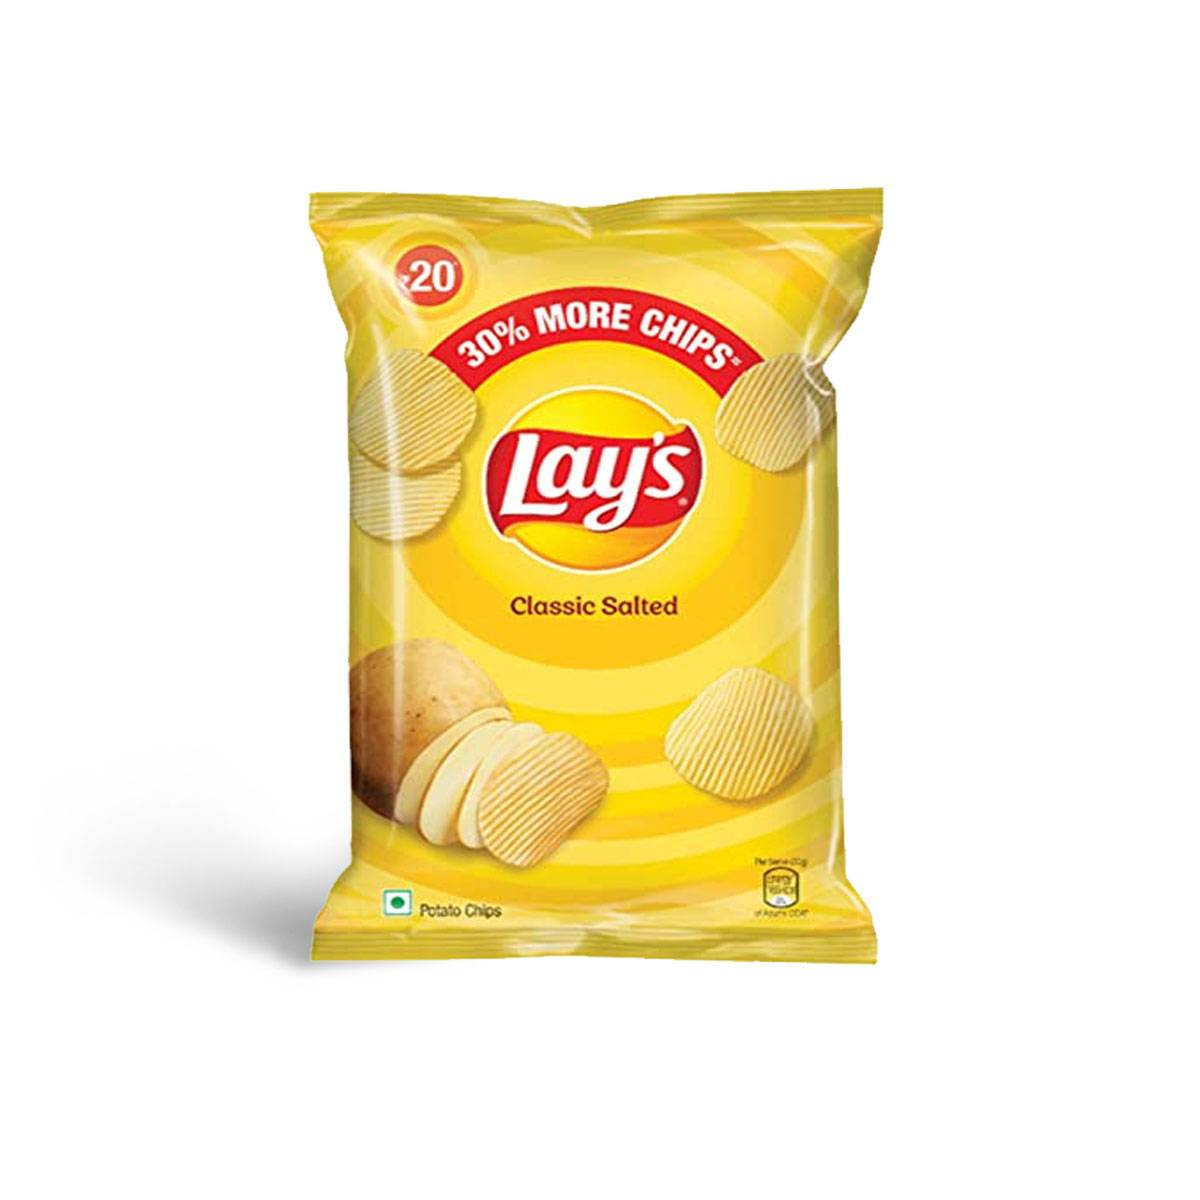 Lays potato chips - Classic Salted, 12 G